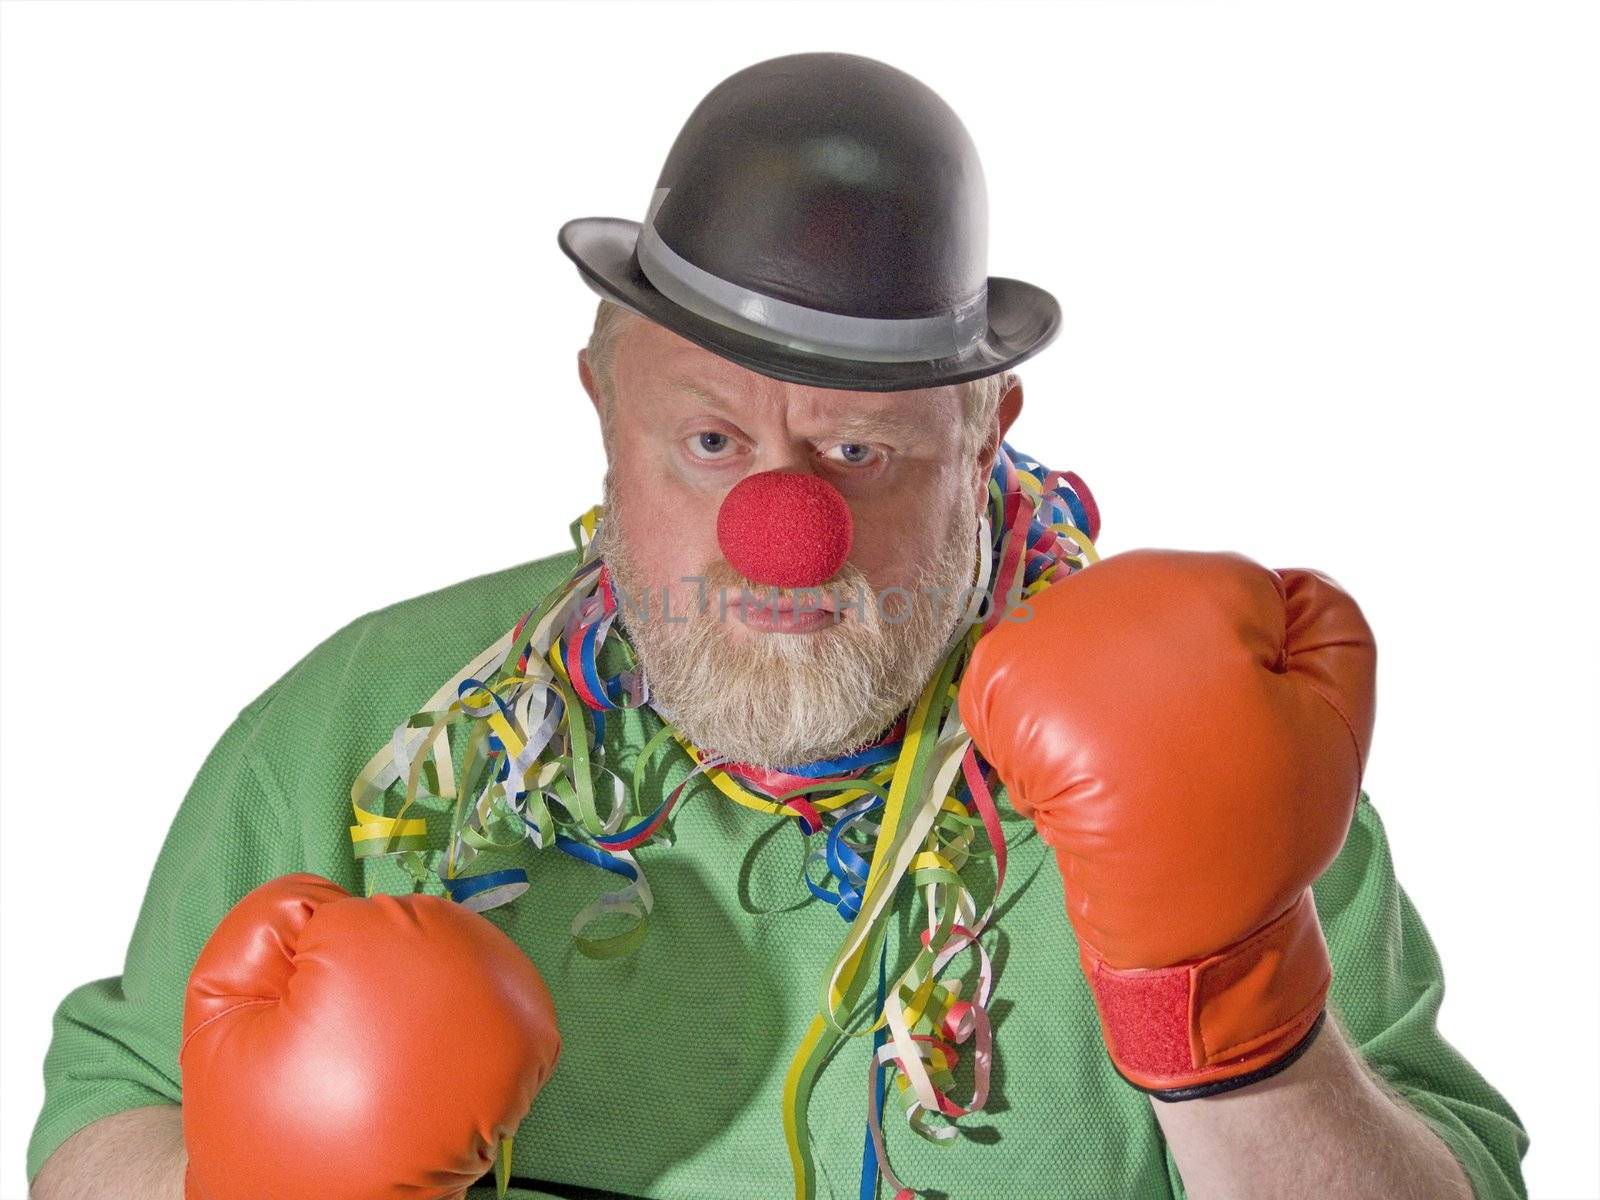 Boxing clown with black hat, false nose and boxing gloves